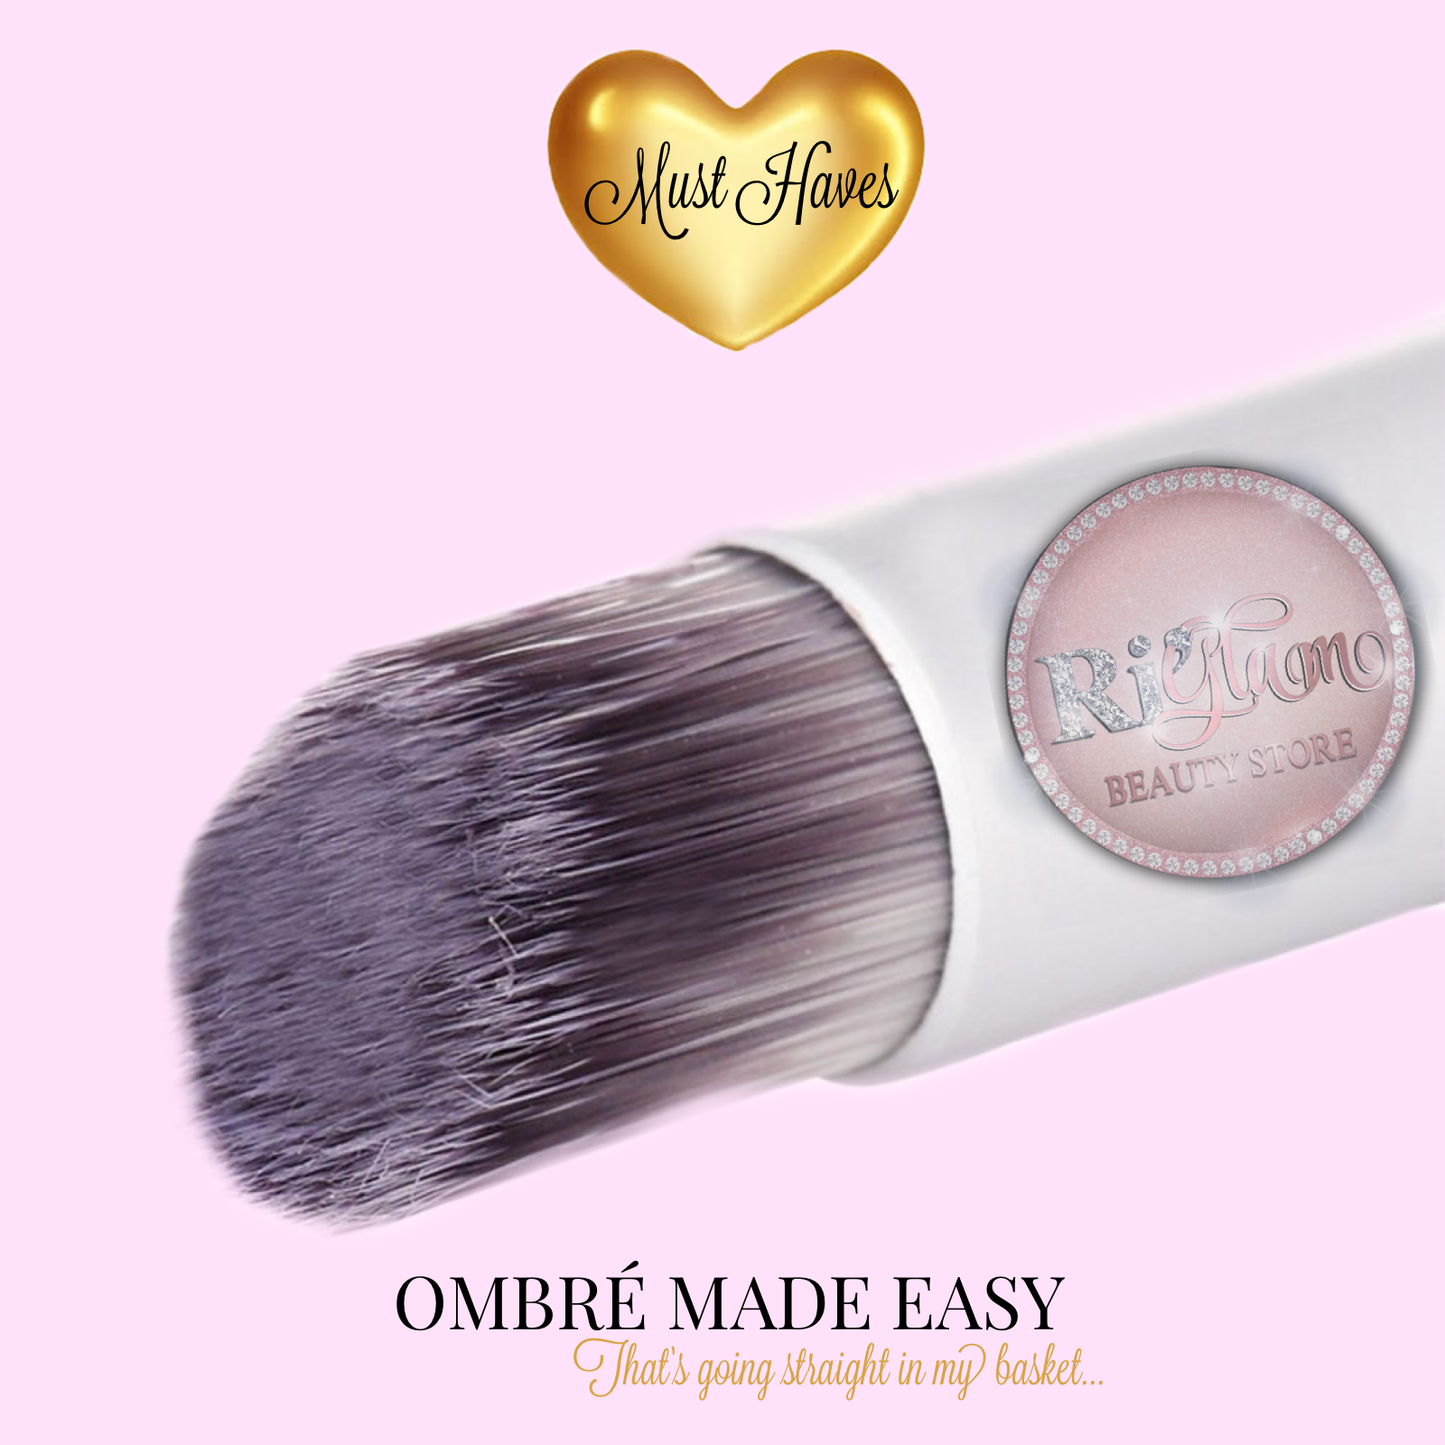 Ombre Brush Tool